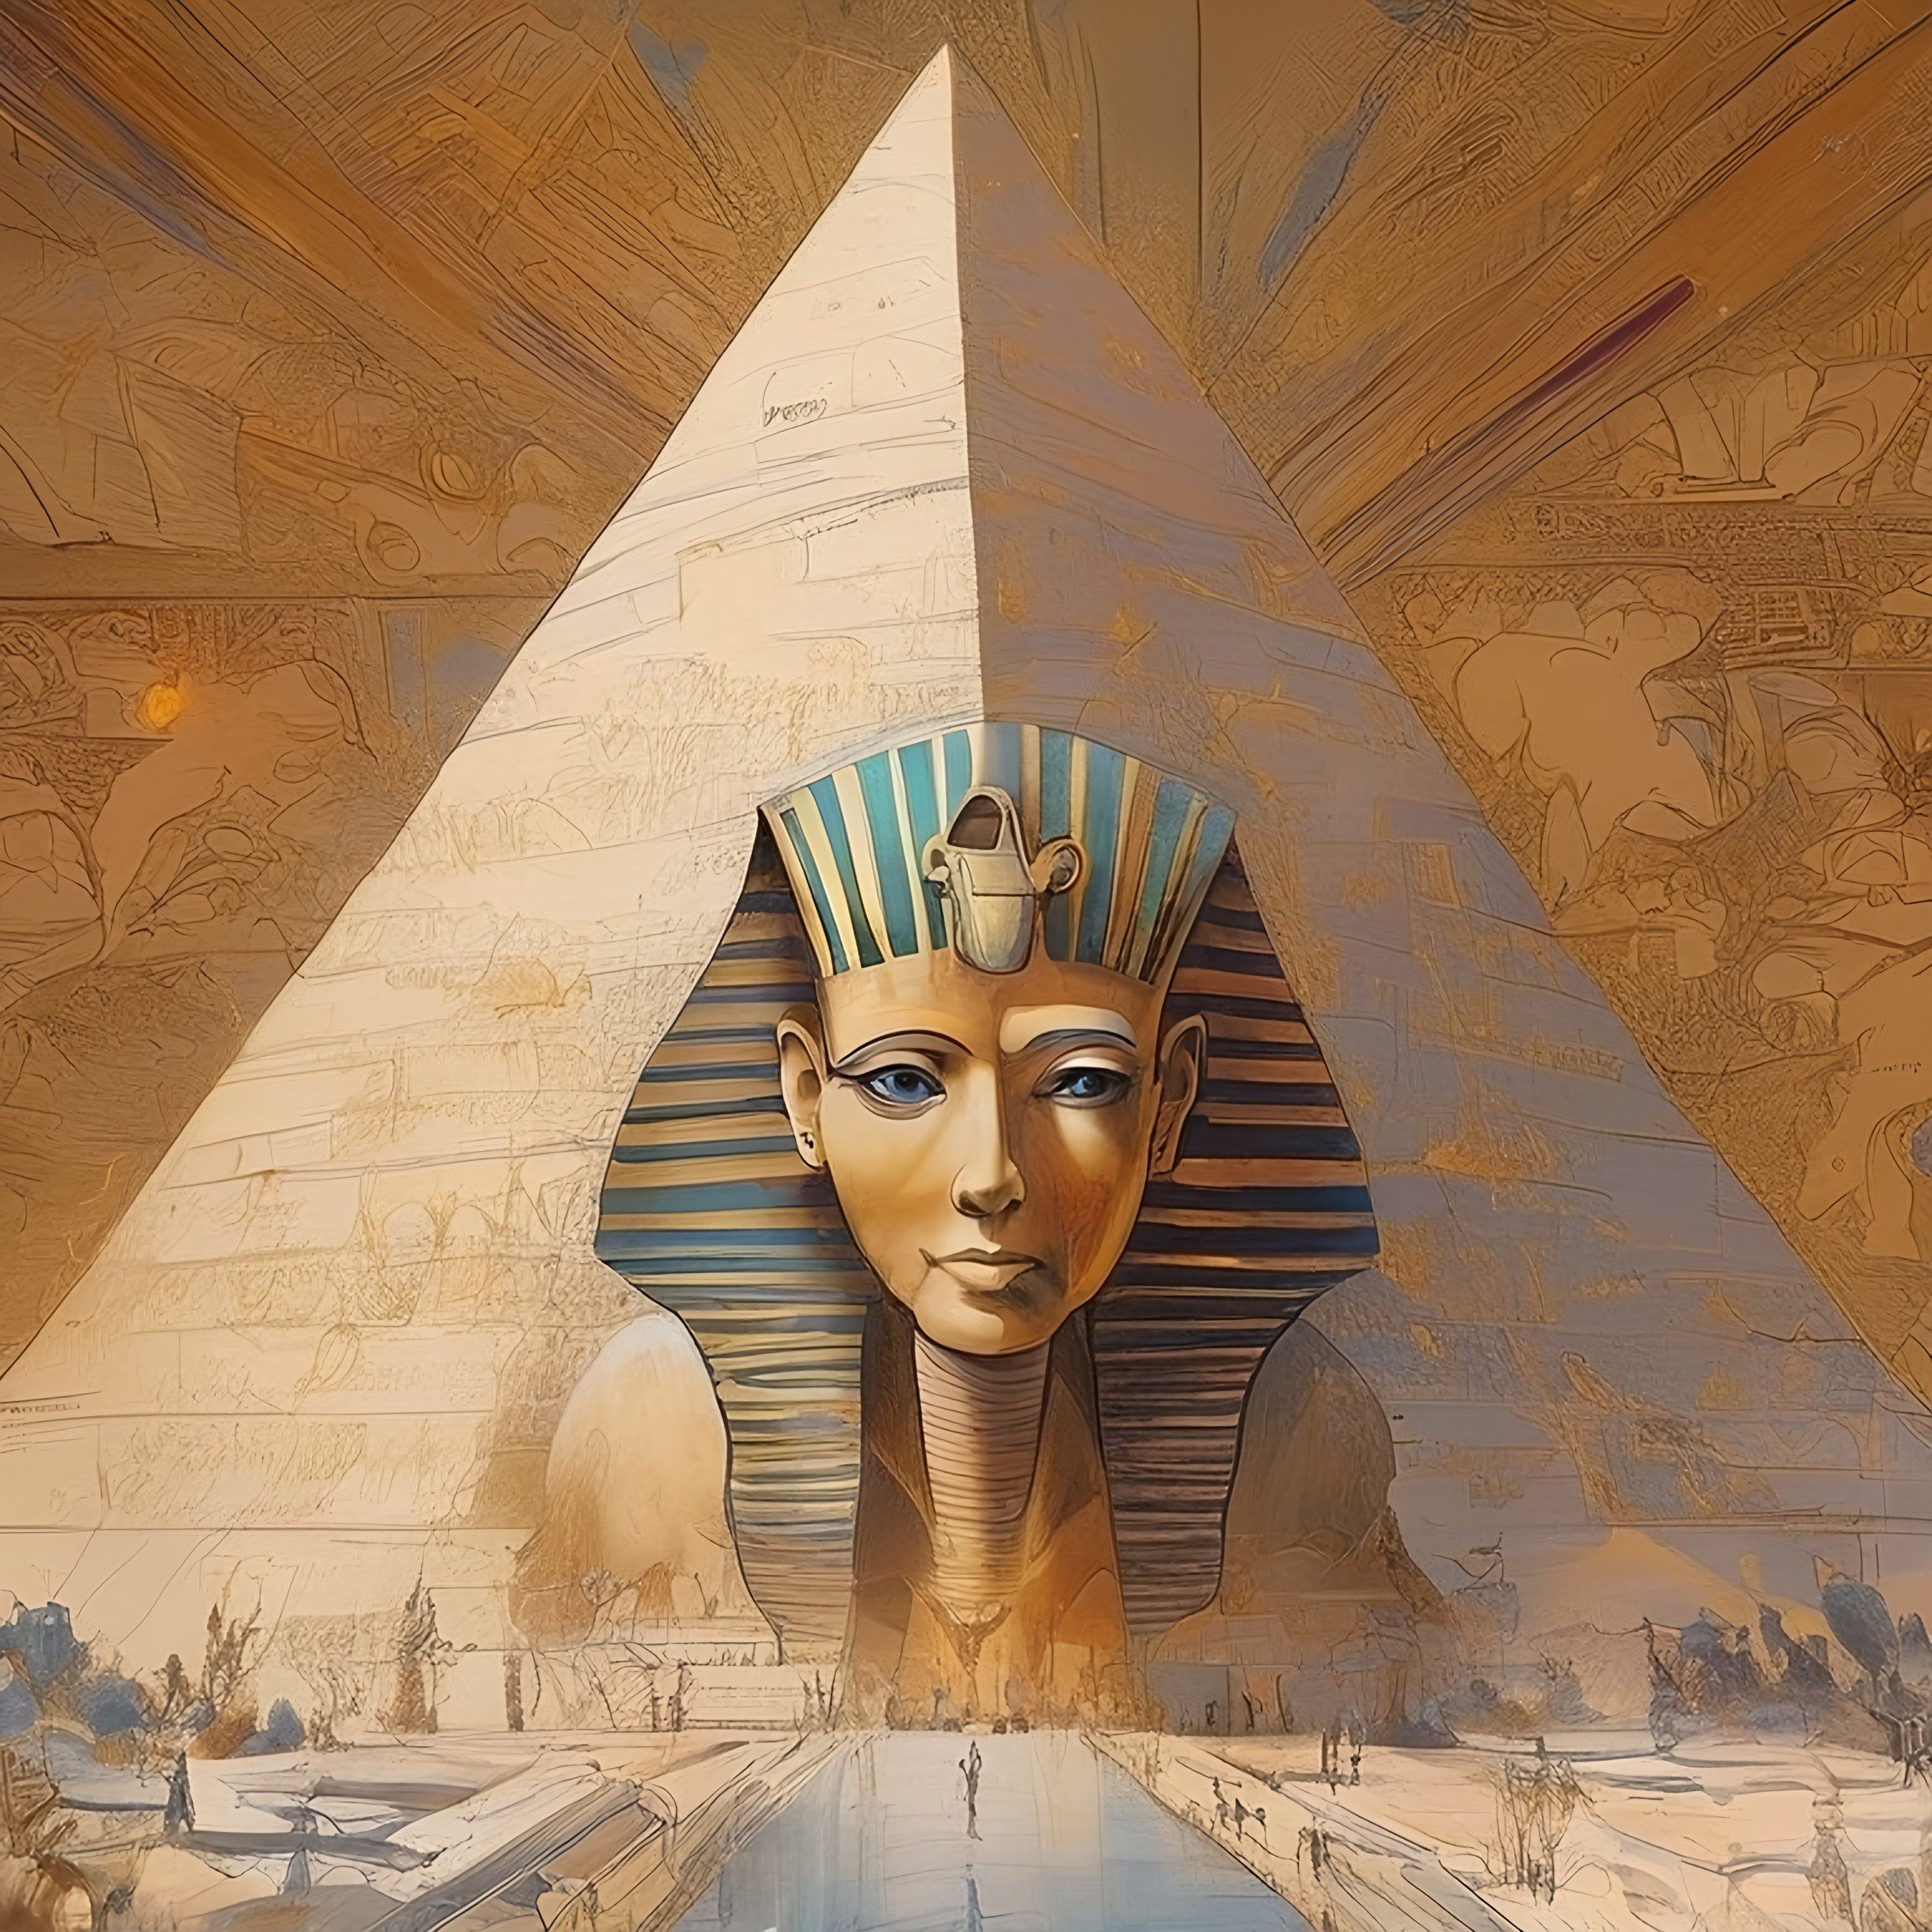 Prompt: a painting of a sphinx head with a pyramid in the background and a river with people in the foreground, fantasy art, syd mead. rich colors, egyptian art